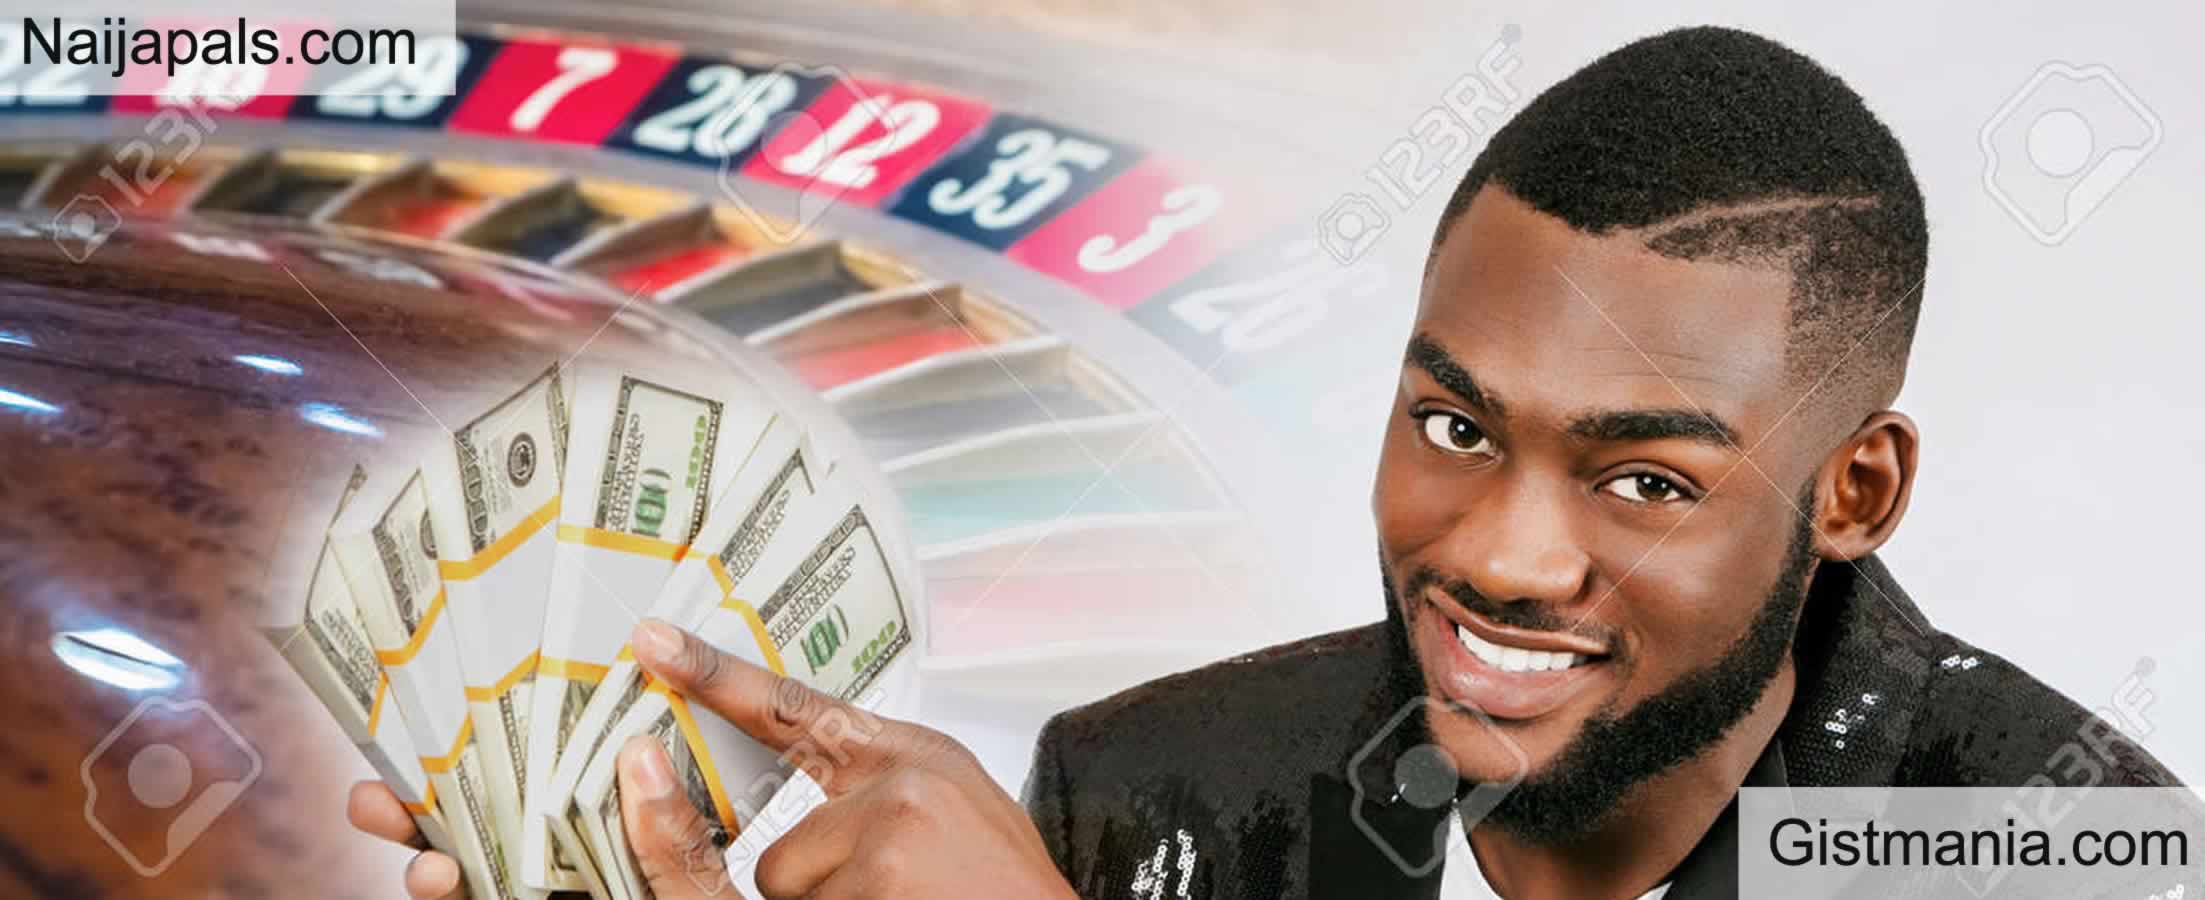 New Study Reveals 36% Of Nigerian Adult Citizens Engage In Gambling Activities - Gistmania